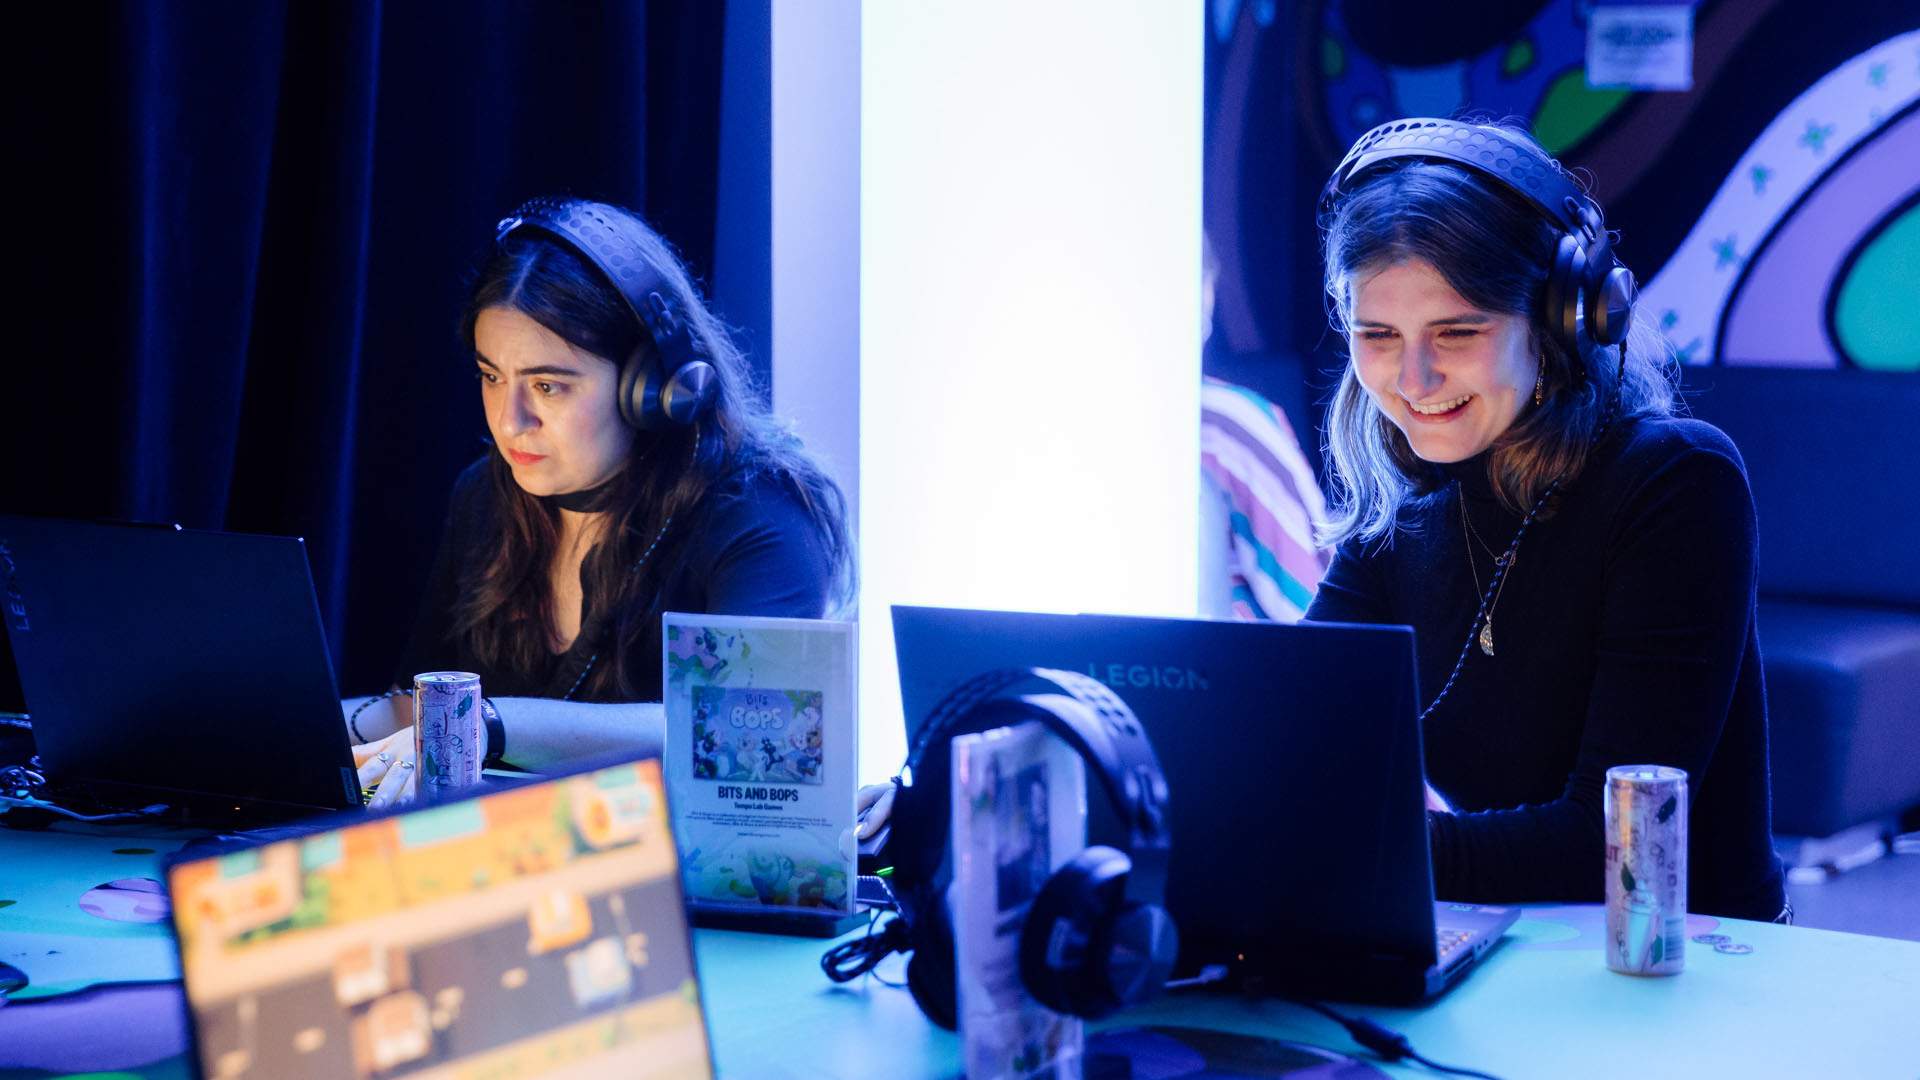 Two women are sitting next to each other with headphones on and gaming on laptops in front of them. They are smiling and obviously having fun.